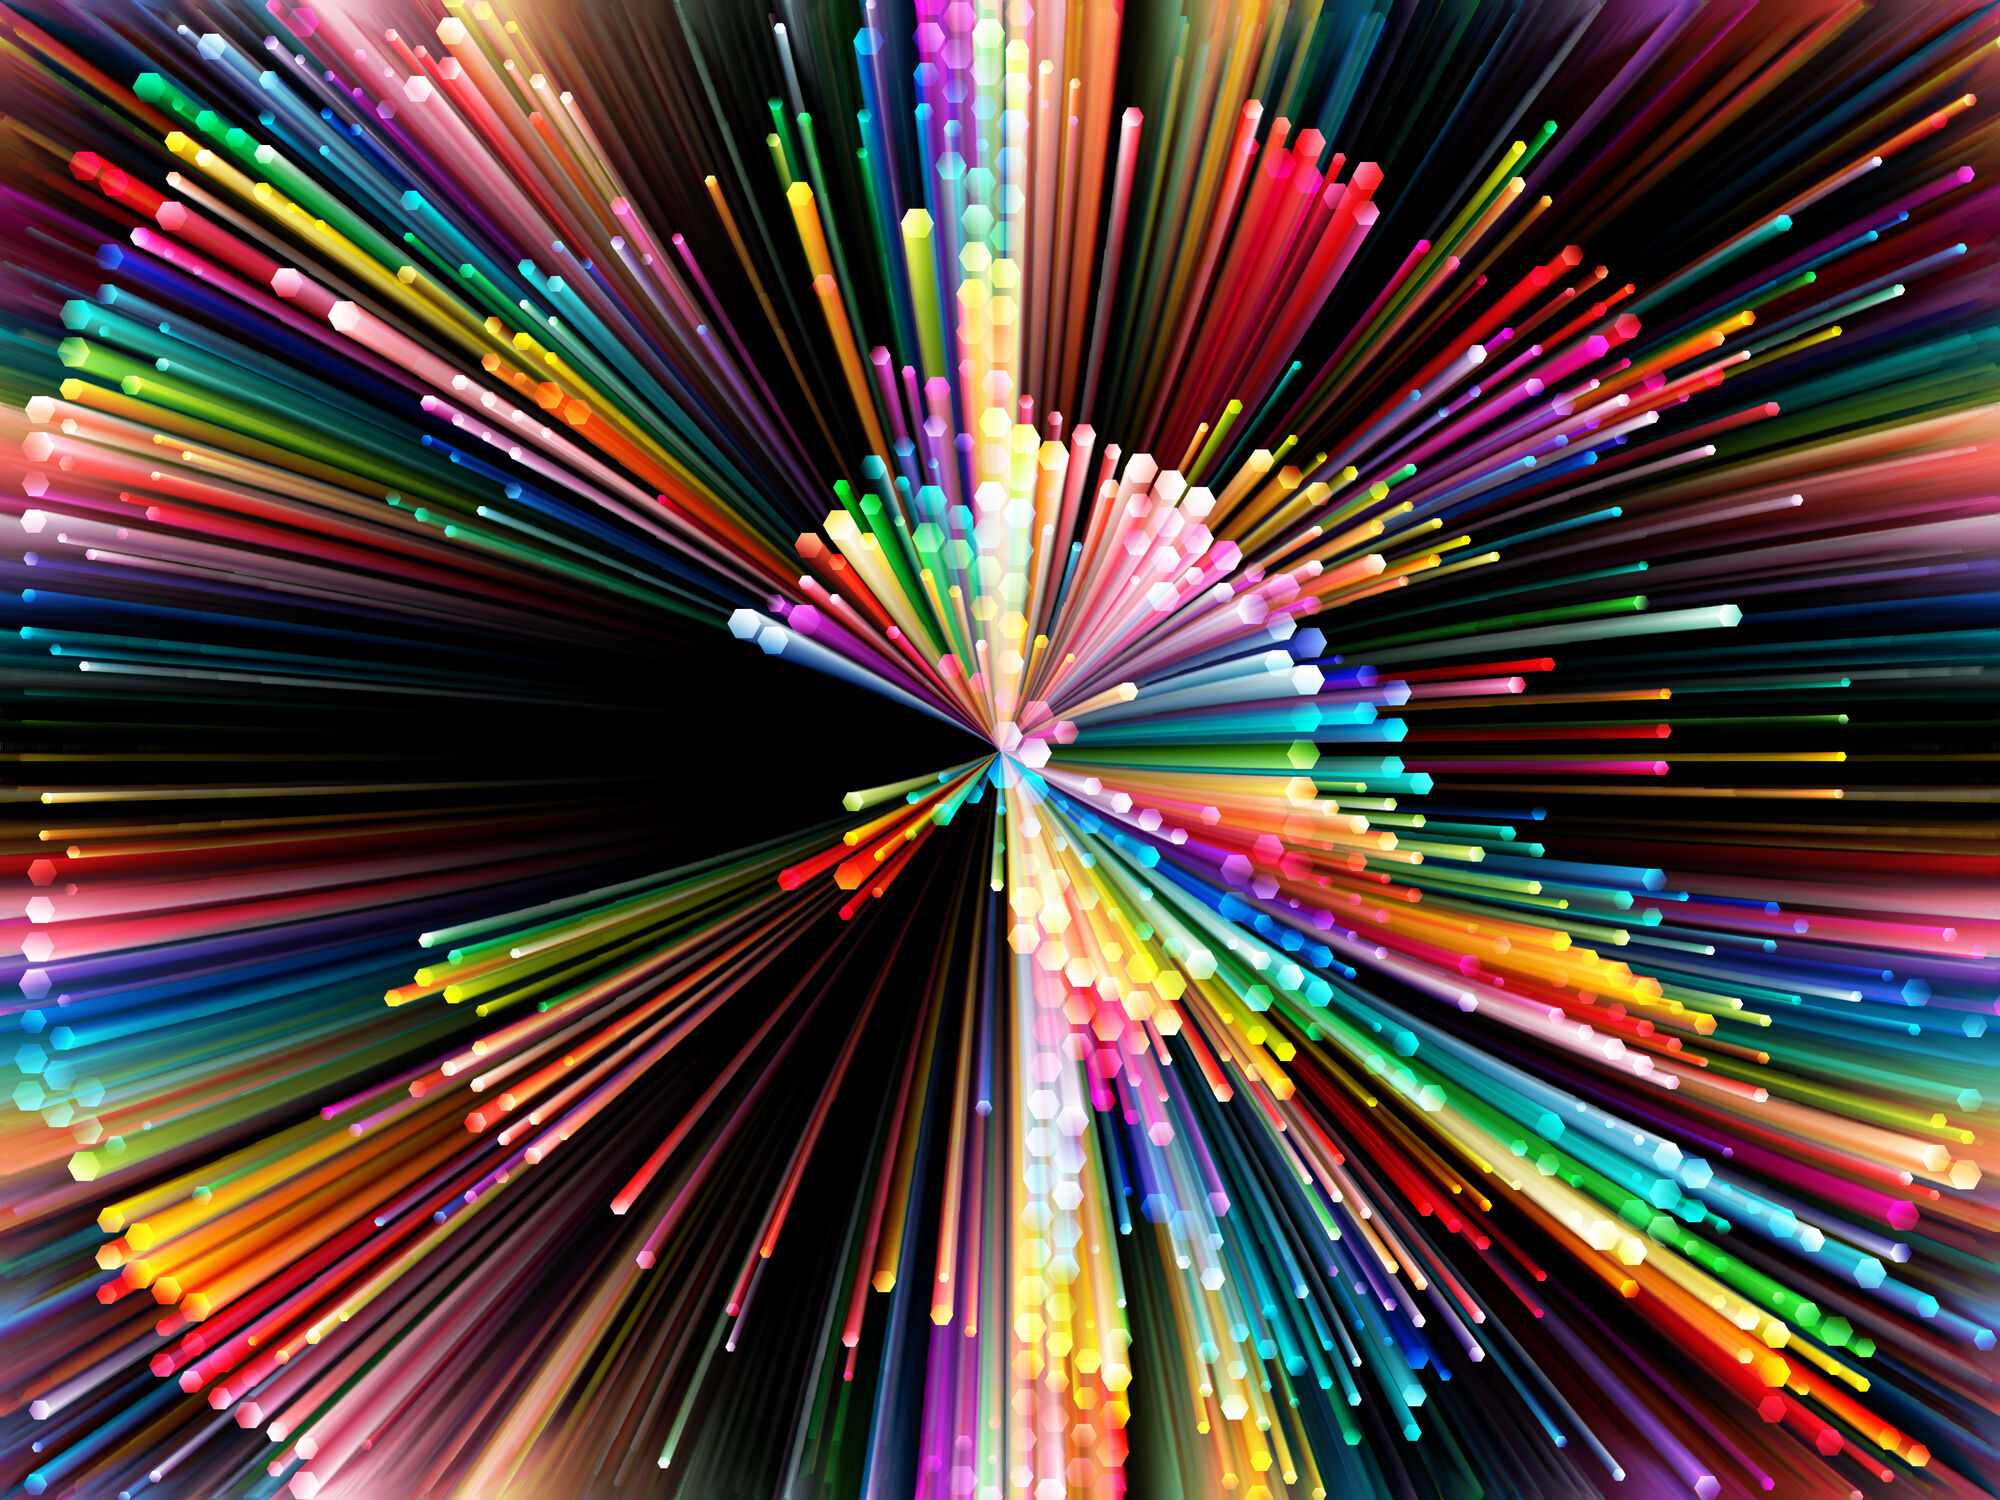 multi colored rods expanding from a center point against a black background